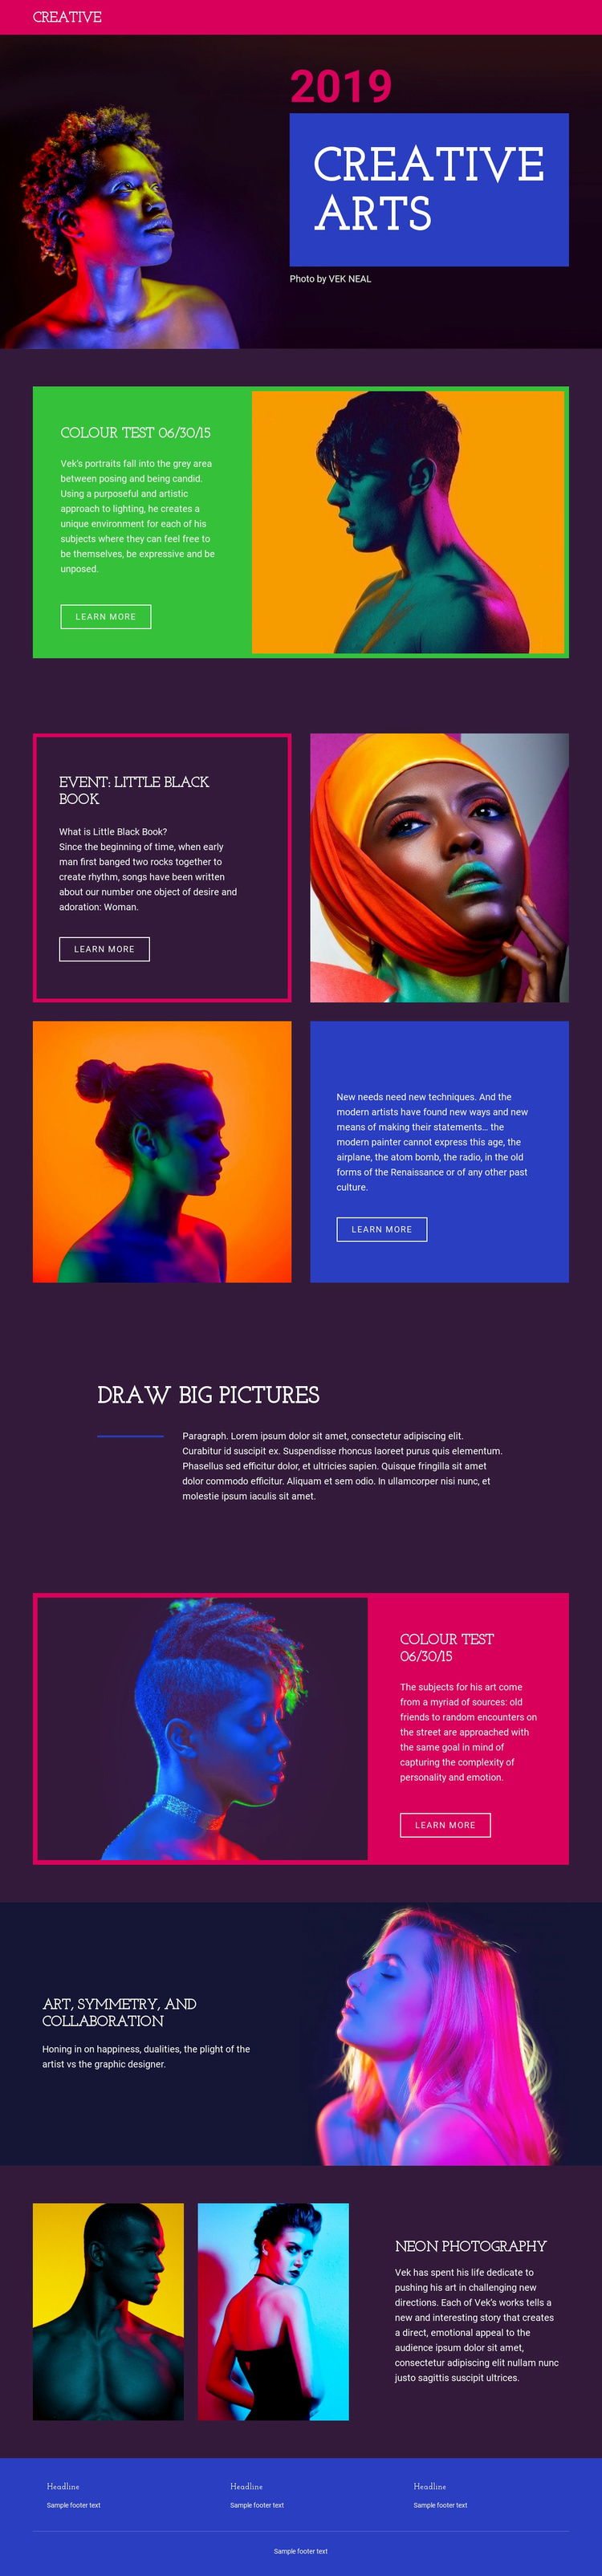 Limited-edition photography Wix Template Alternative